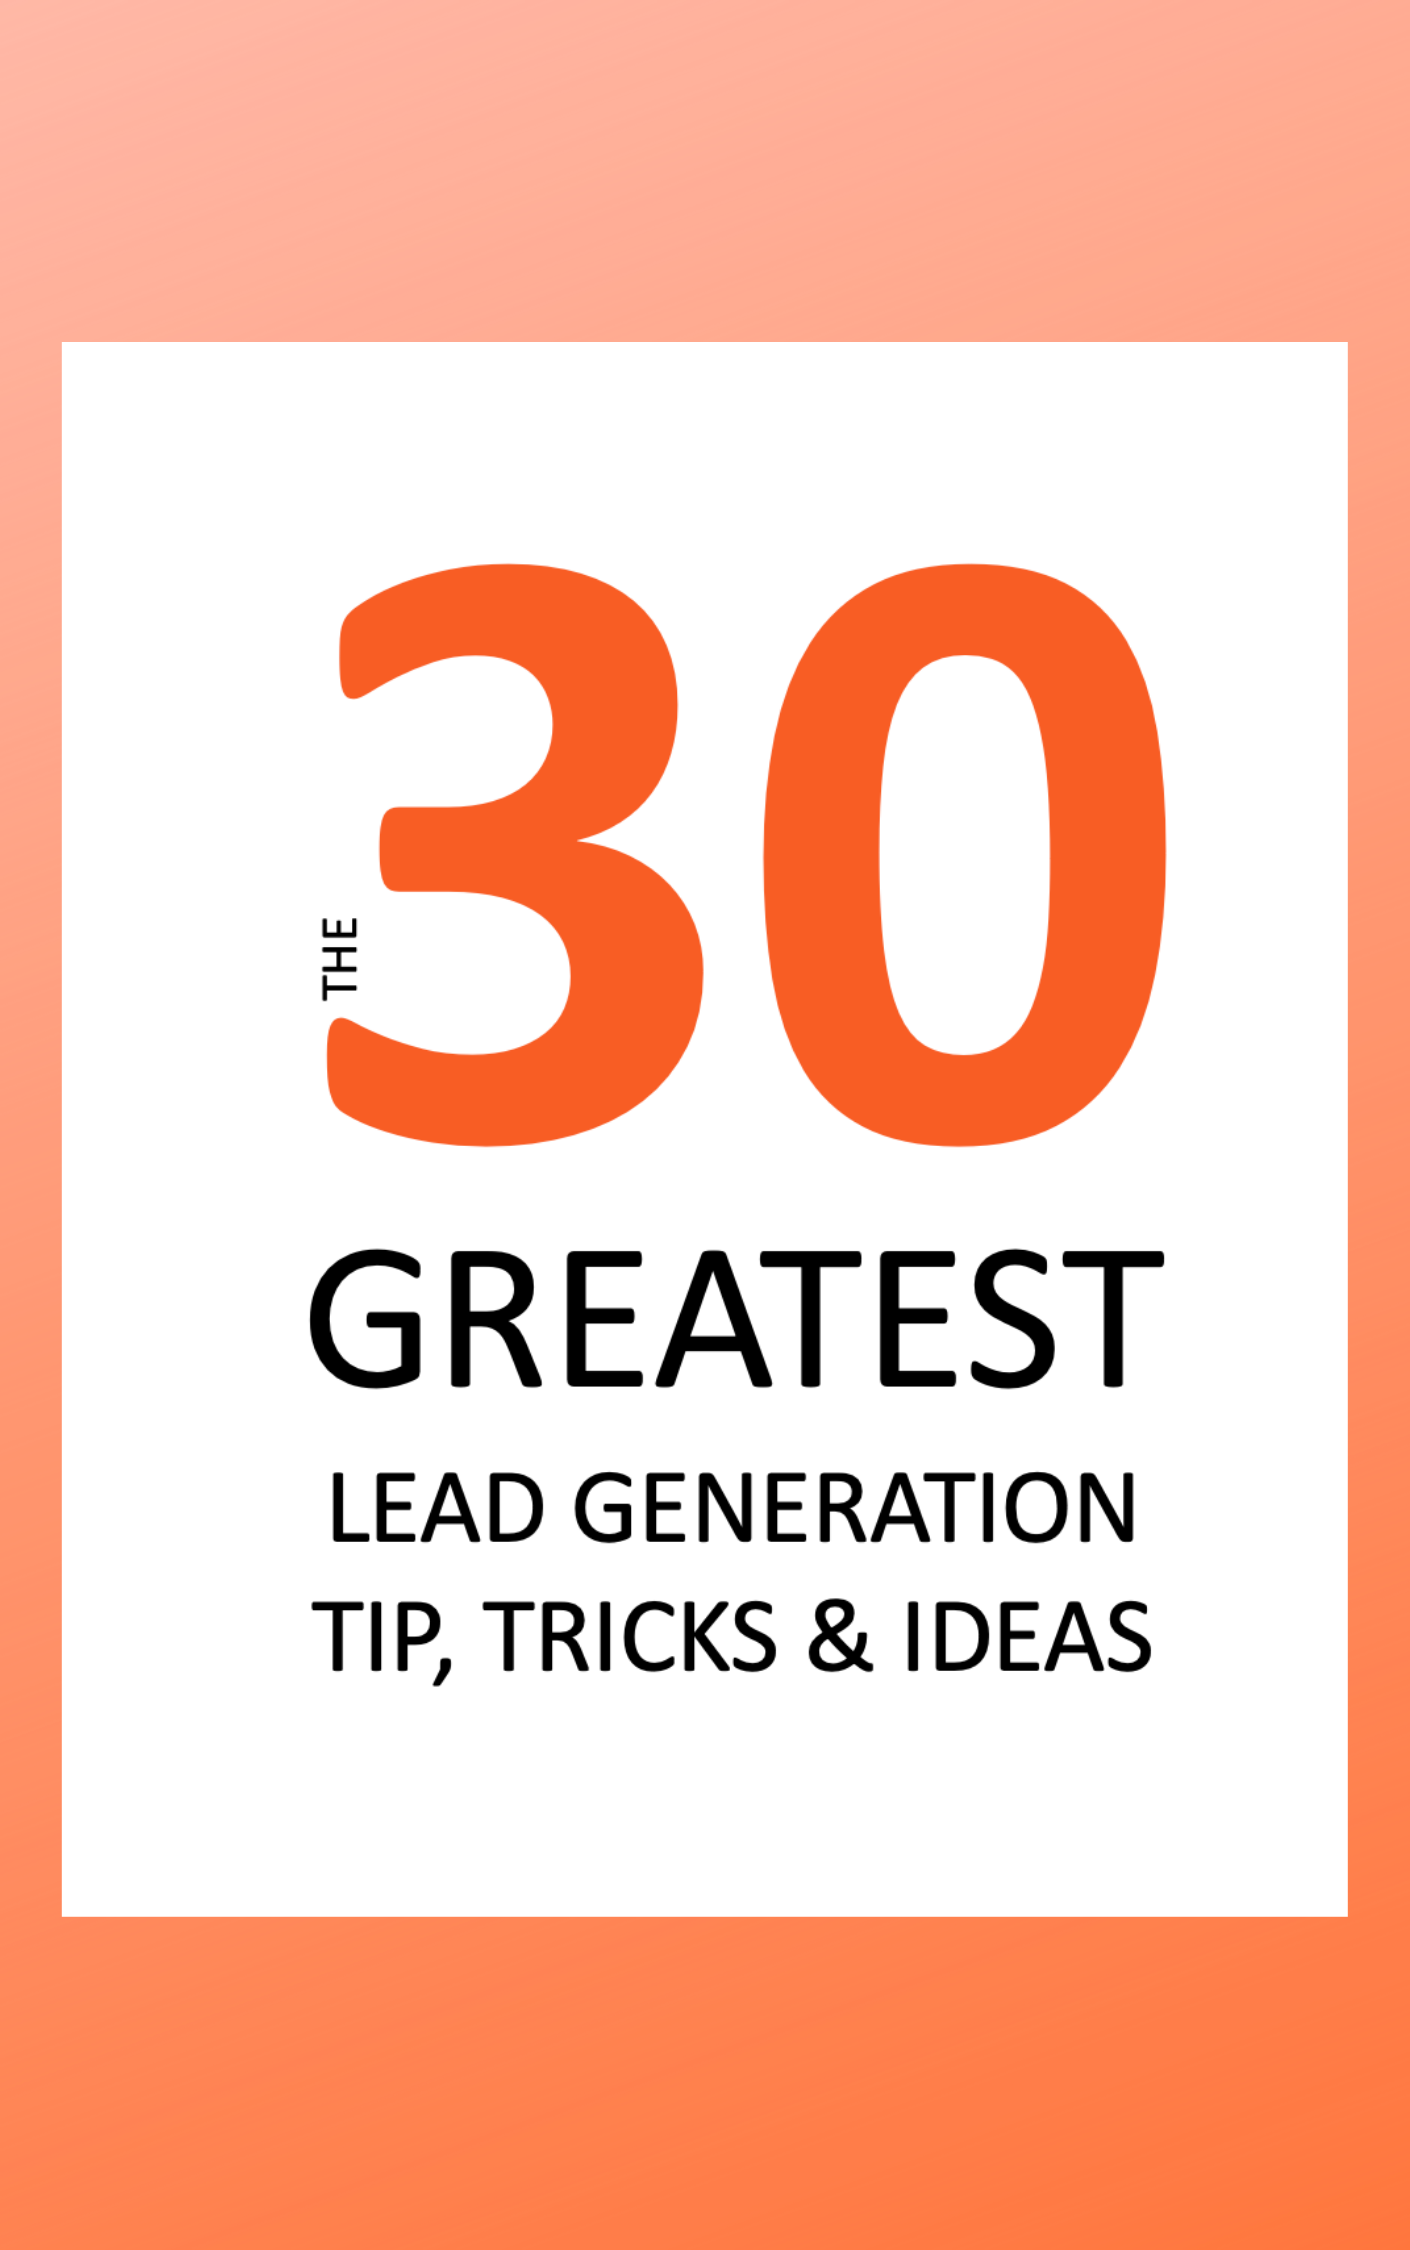 The 30 Greatest Lead Generation Tip, Tricks, and Ideas